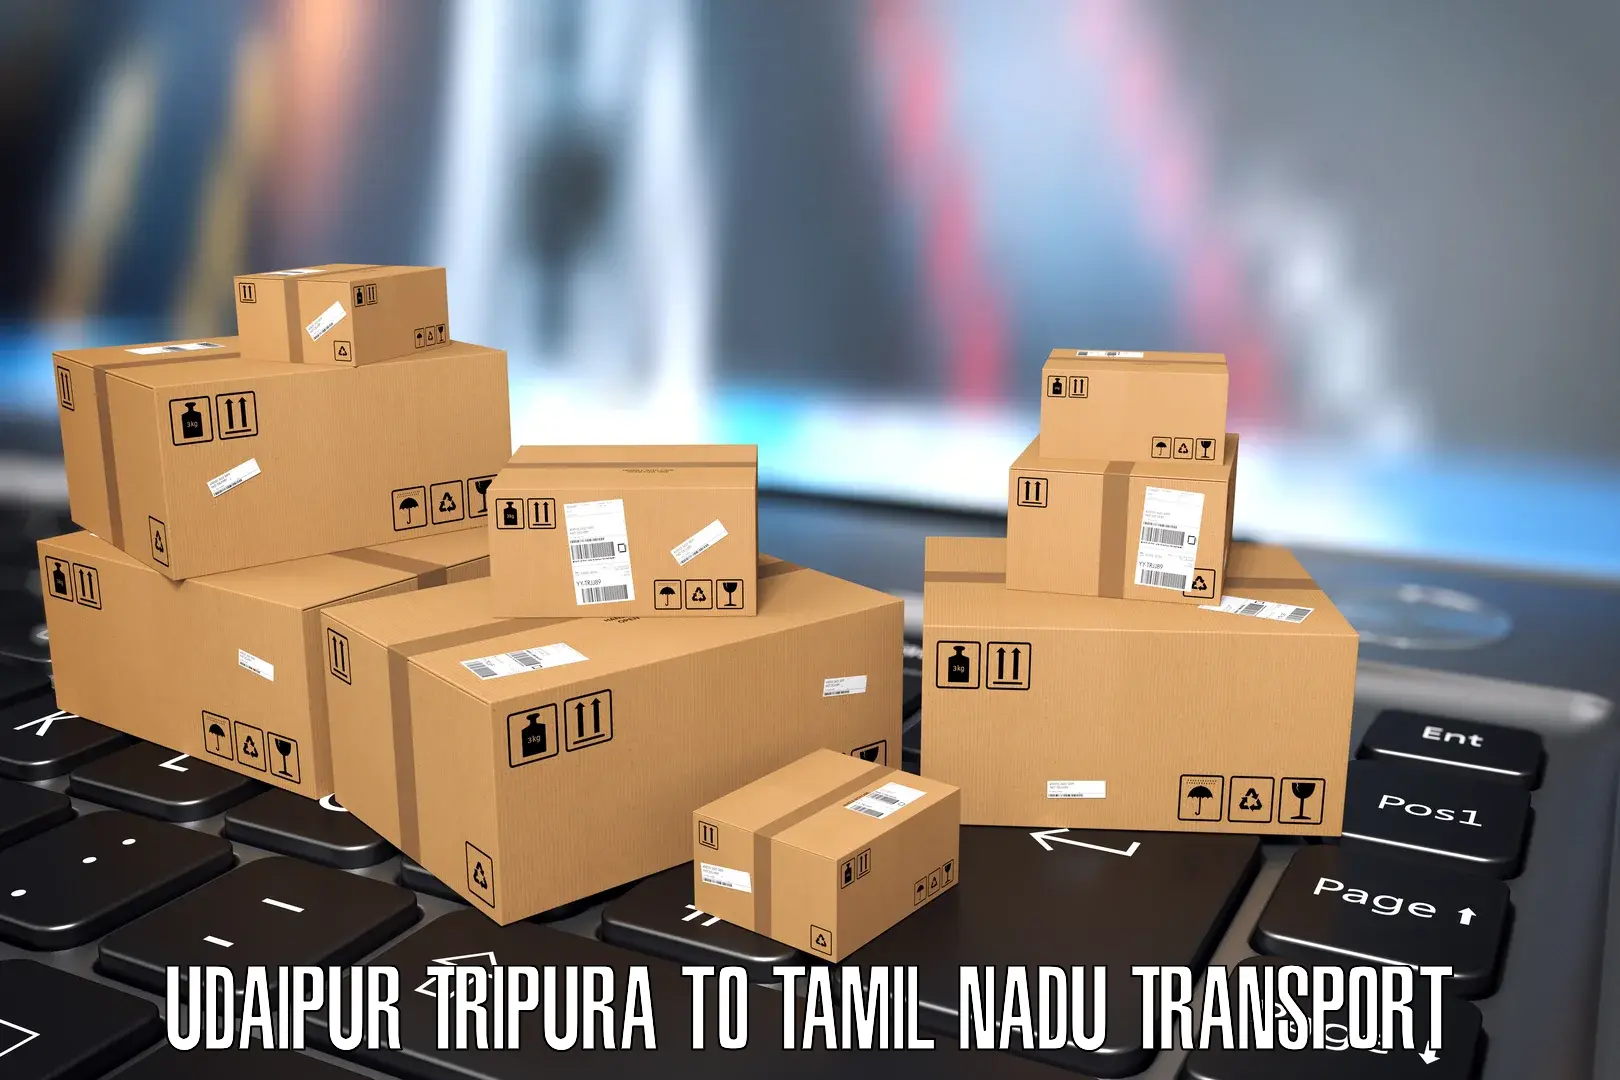 Package delivery services Udaipur Tripura to Thiruvarur